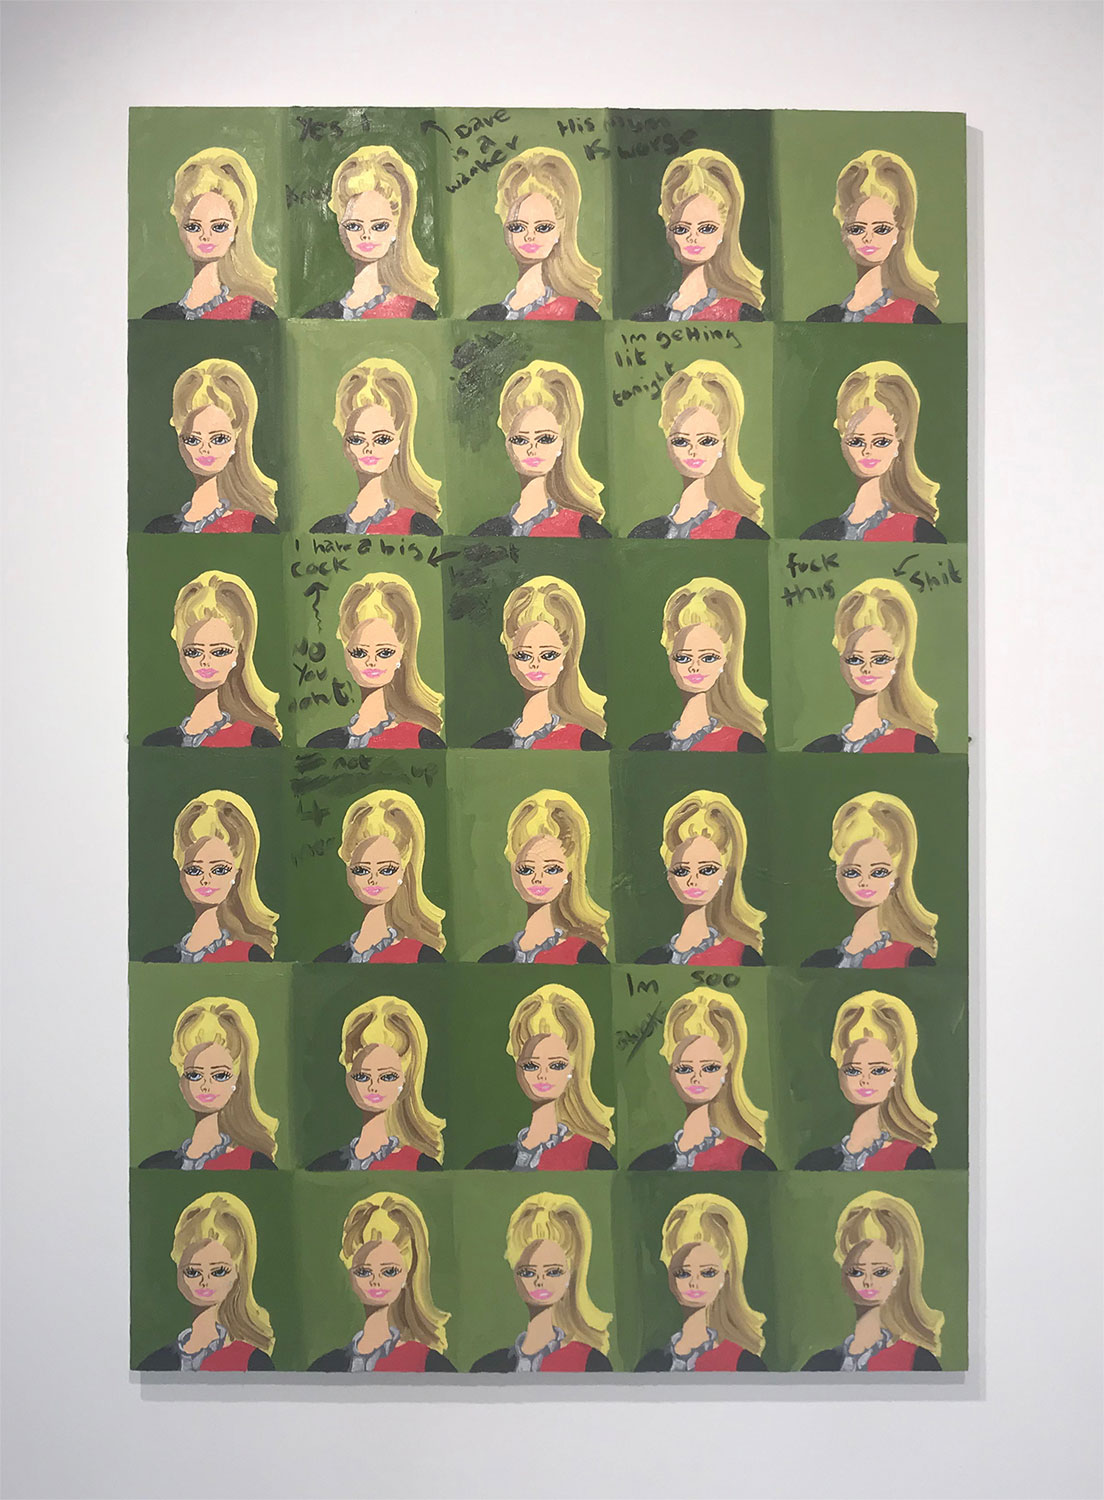 Large oil painting of multiple repeated depictions of a blonde haired woman on green background